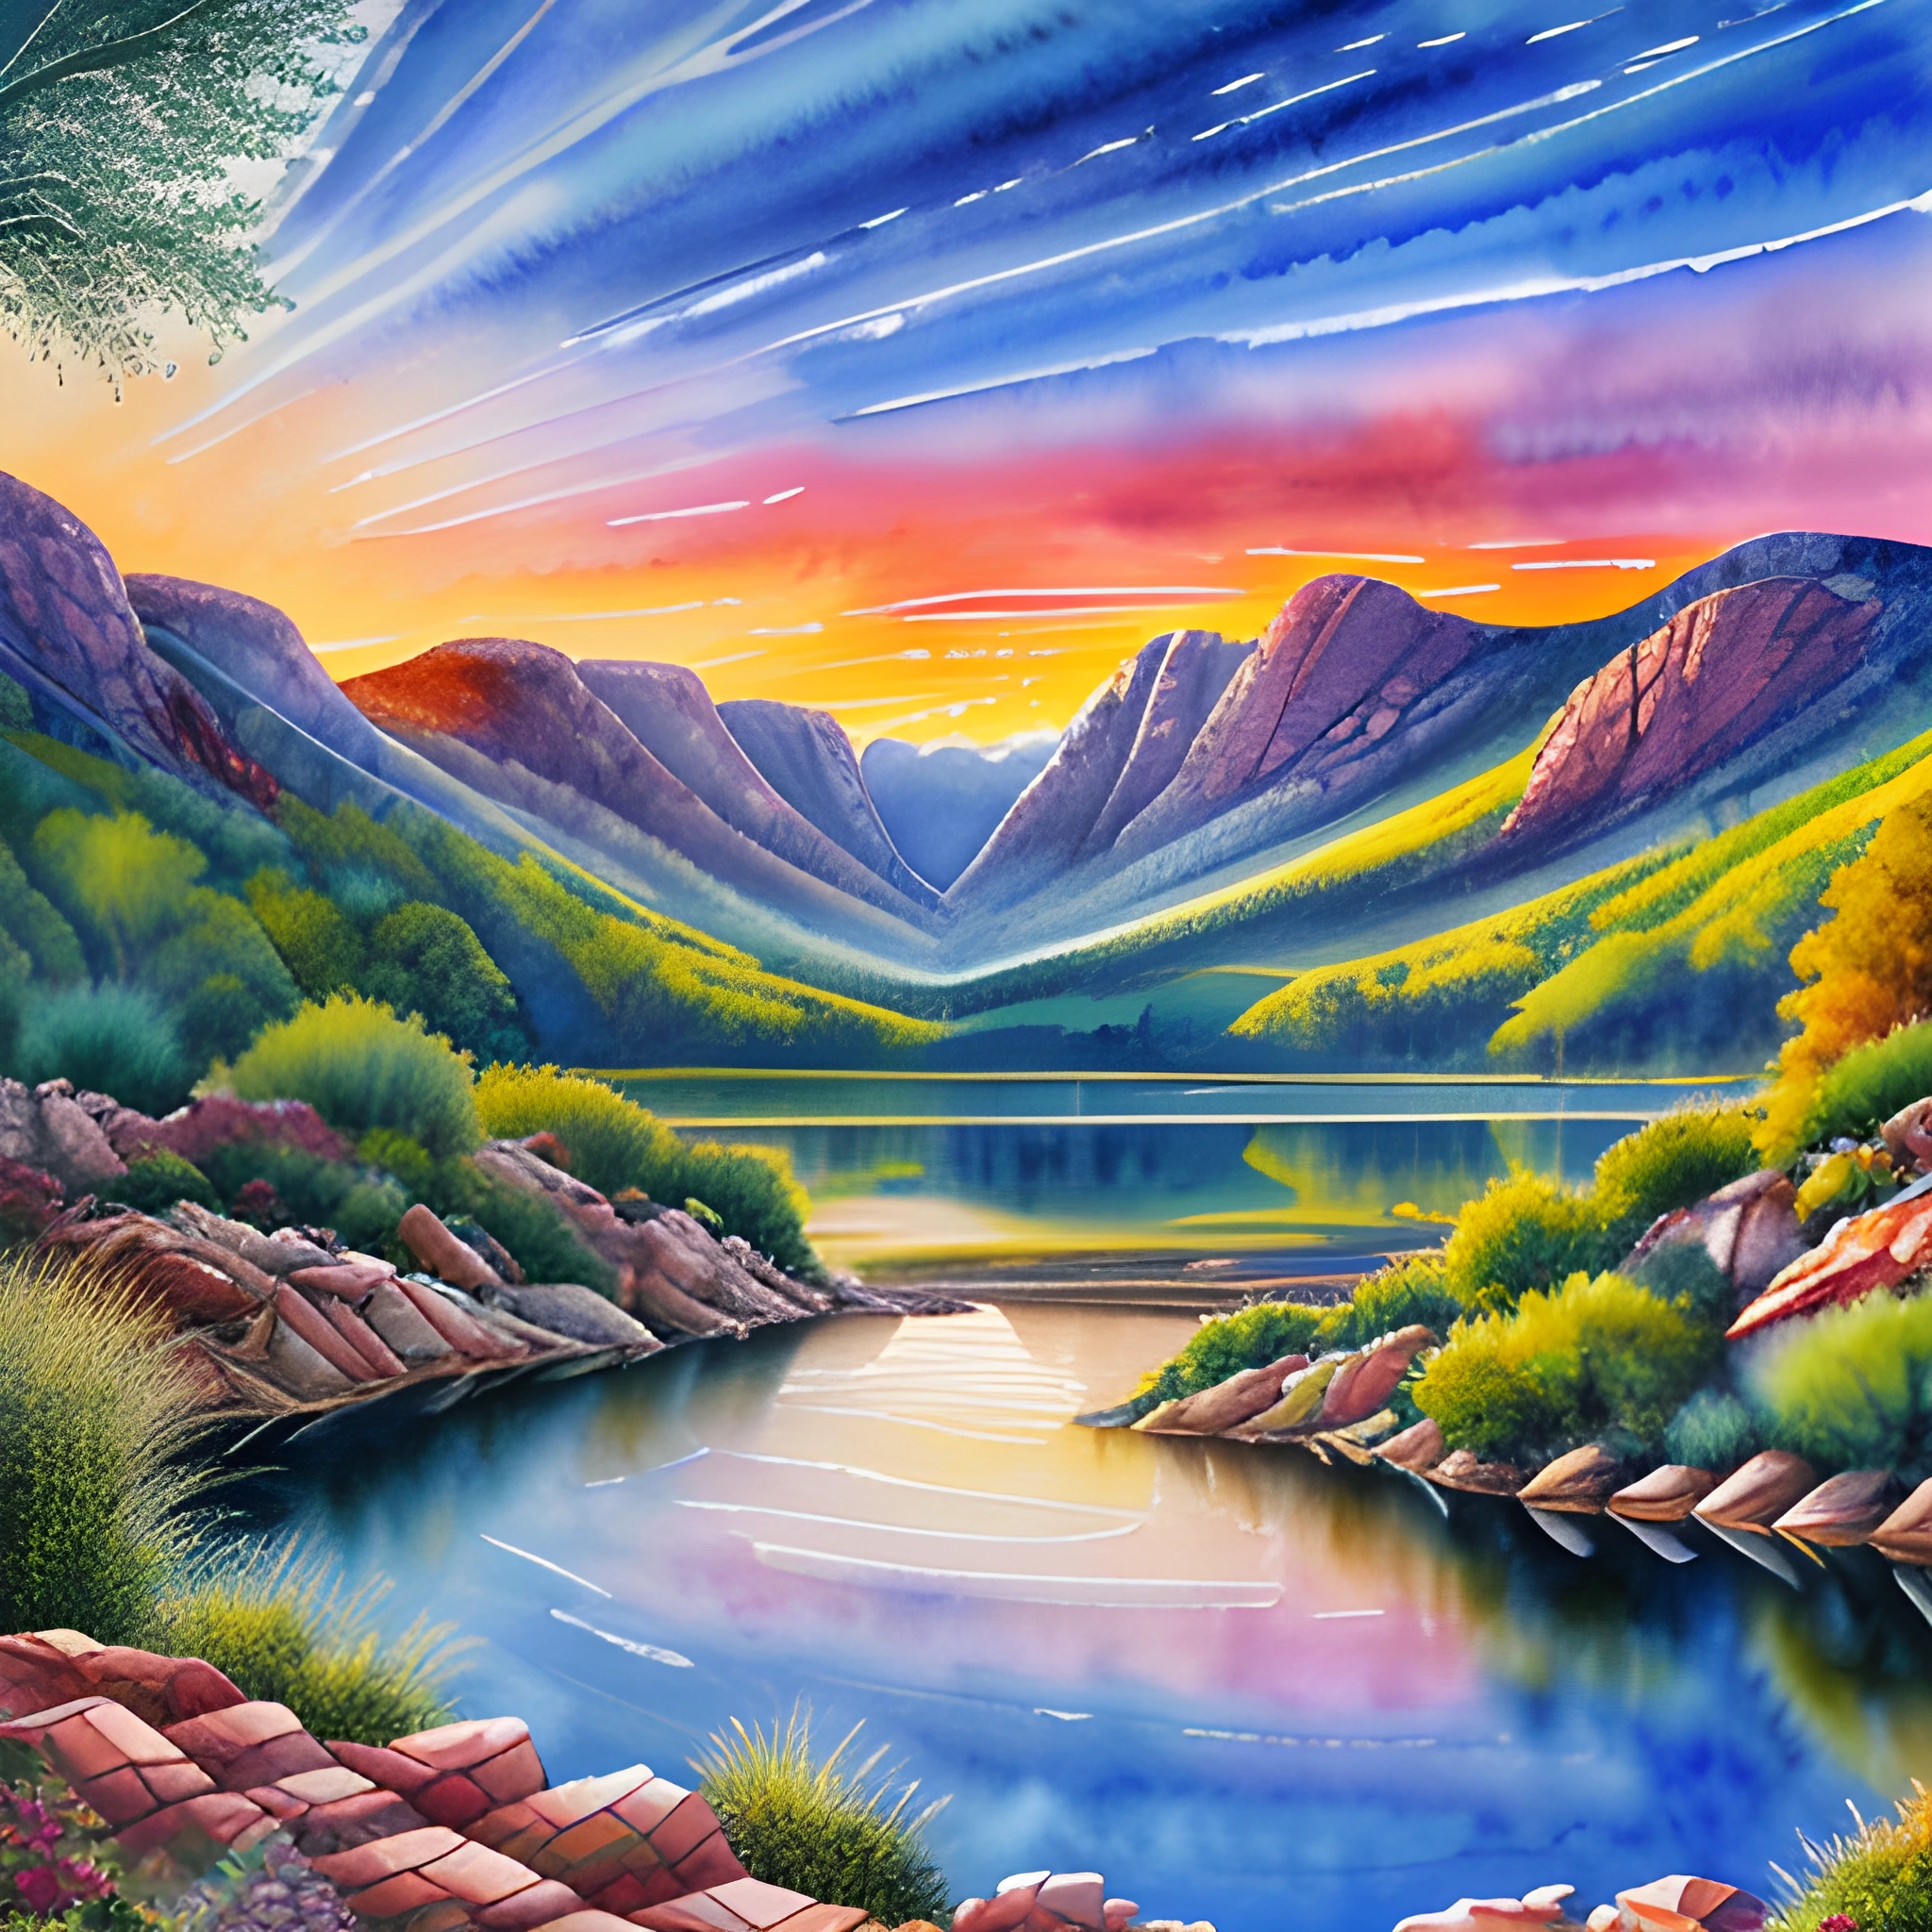 painting of a mountain landscape with a river and a colorful sky